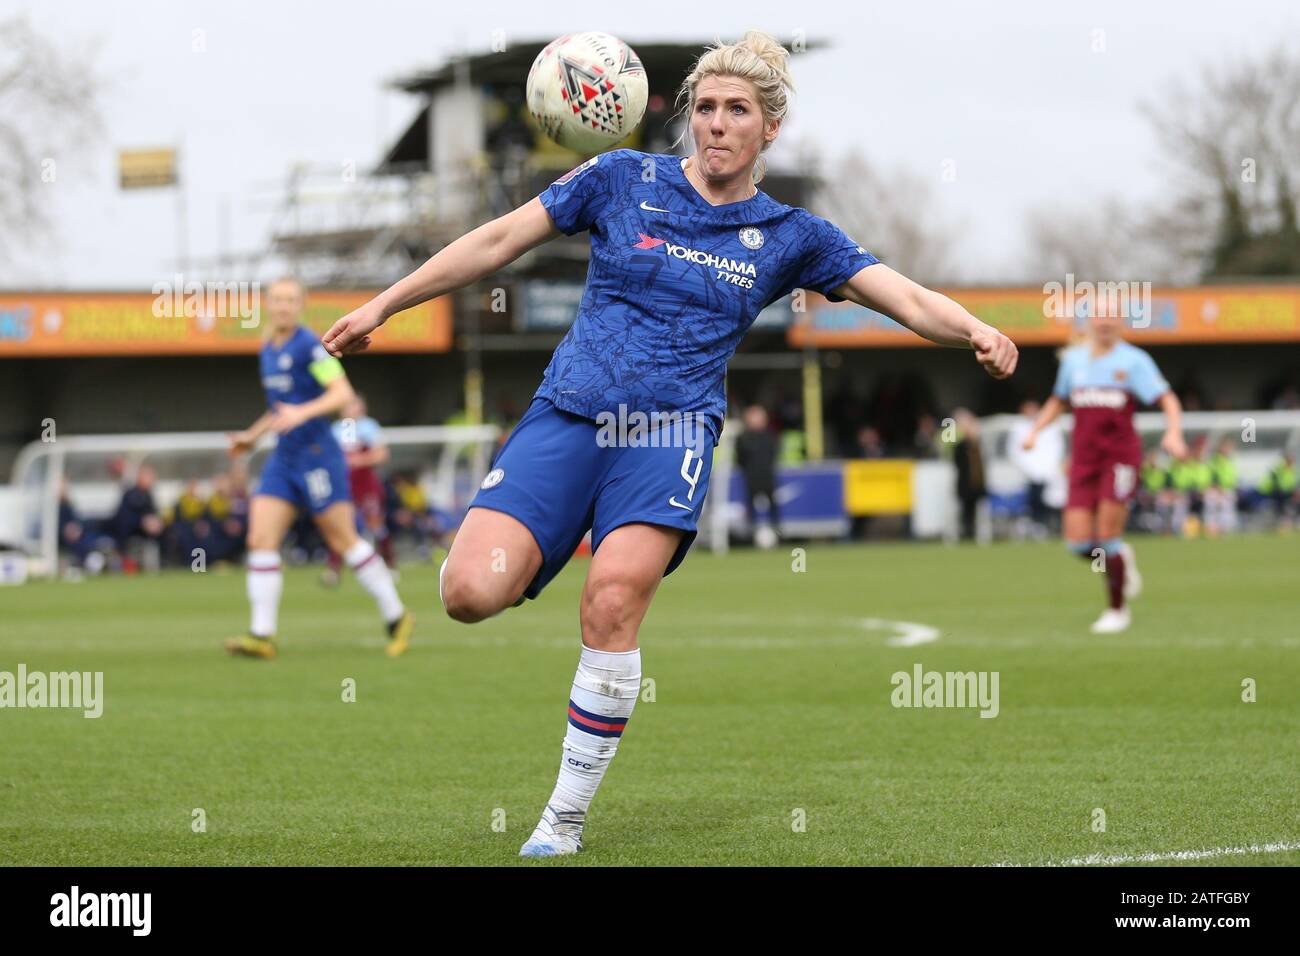 KINGSTON ON THAMES, LONDON - FEBRUARY 2ND Millie Bright of Chelsea Women during the Barclays FA Women's Super League match between Chelsea and West Ham United at the Kingsmeadow, Kingston on Thames on Sunday 2nd February 2020. (Credit: Jacques Feeney | MI News) Photograph may only be used for newspaper and/or magazine editorial purposes, license required for commercial use Credit: MI News & Sport /Alamy Live News Stock Photo